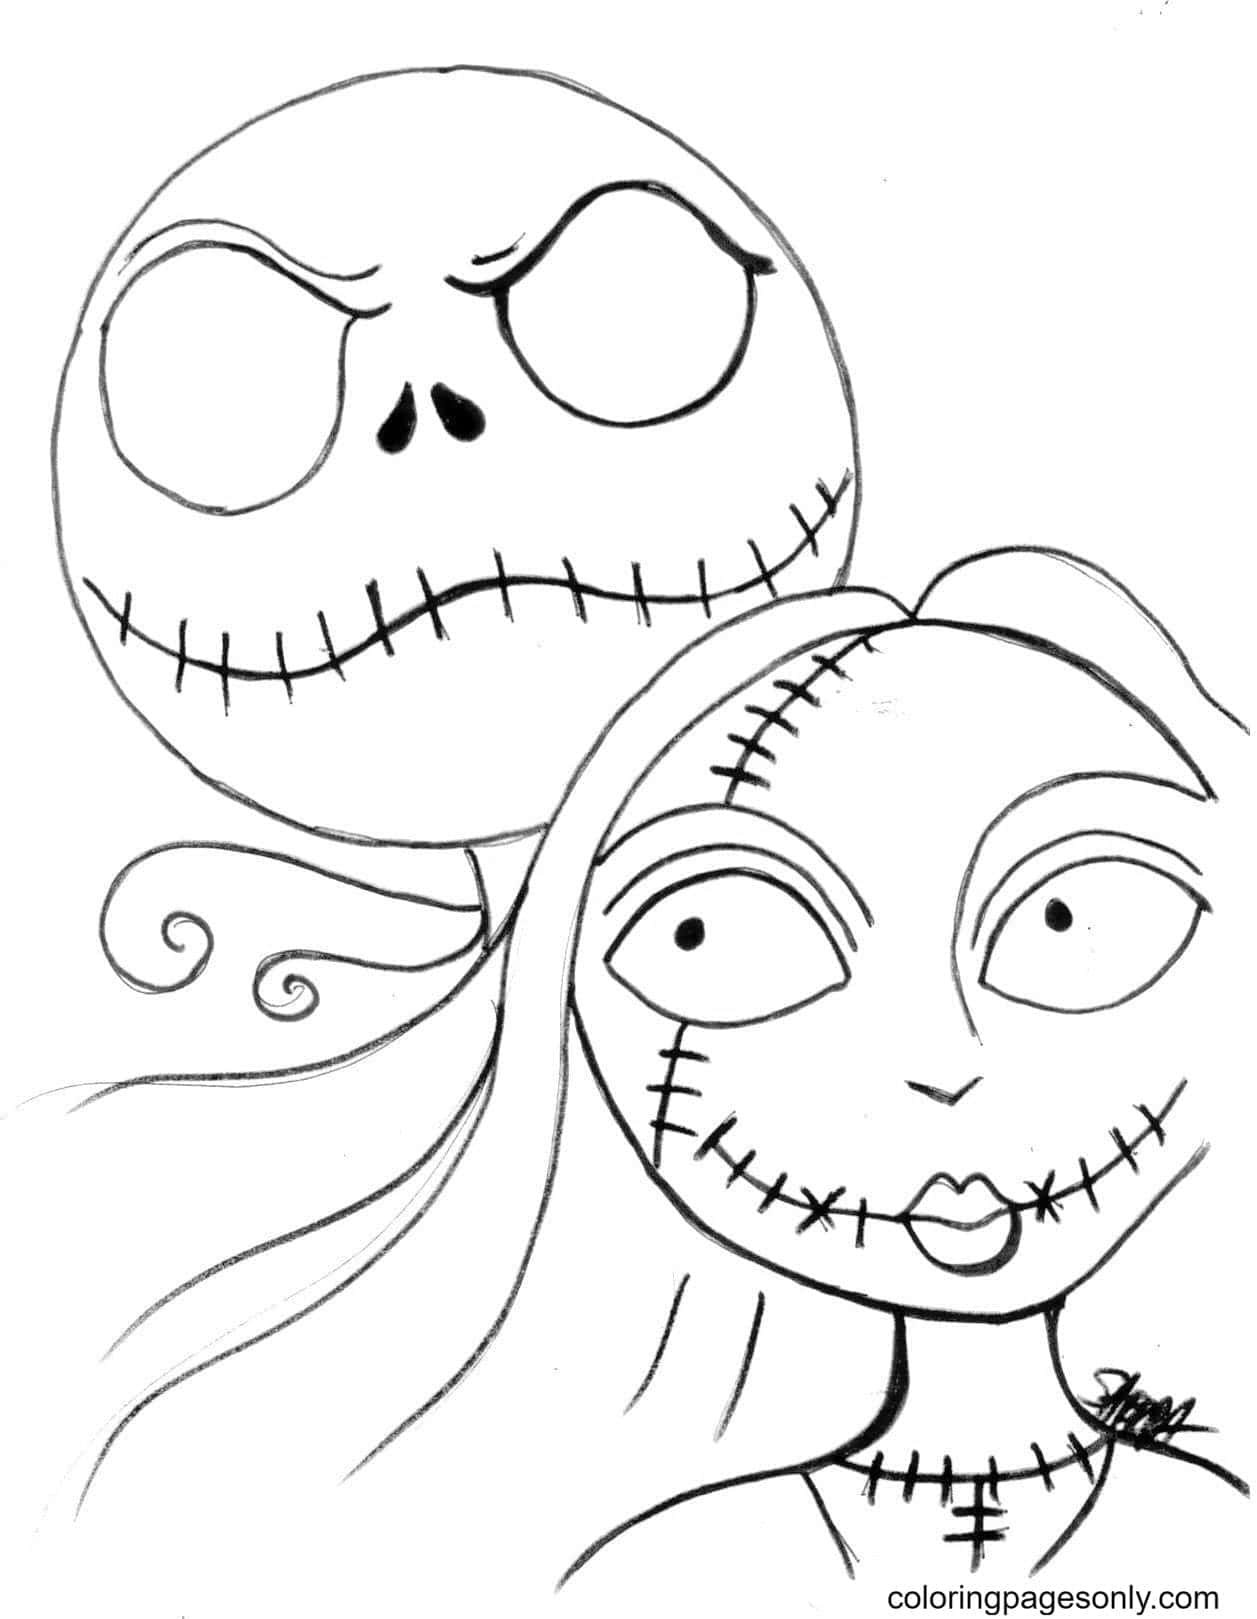 Nightmare before christmas coloring book: perfect Coloring Book